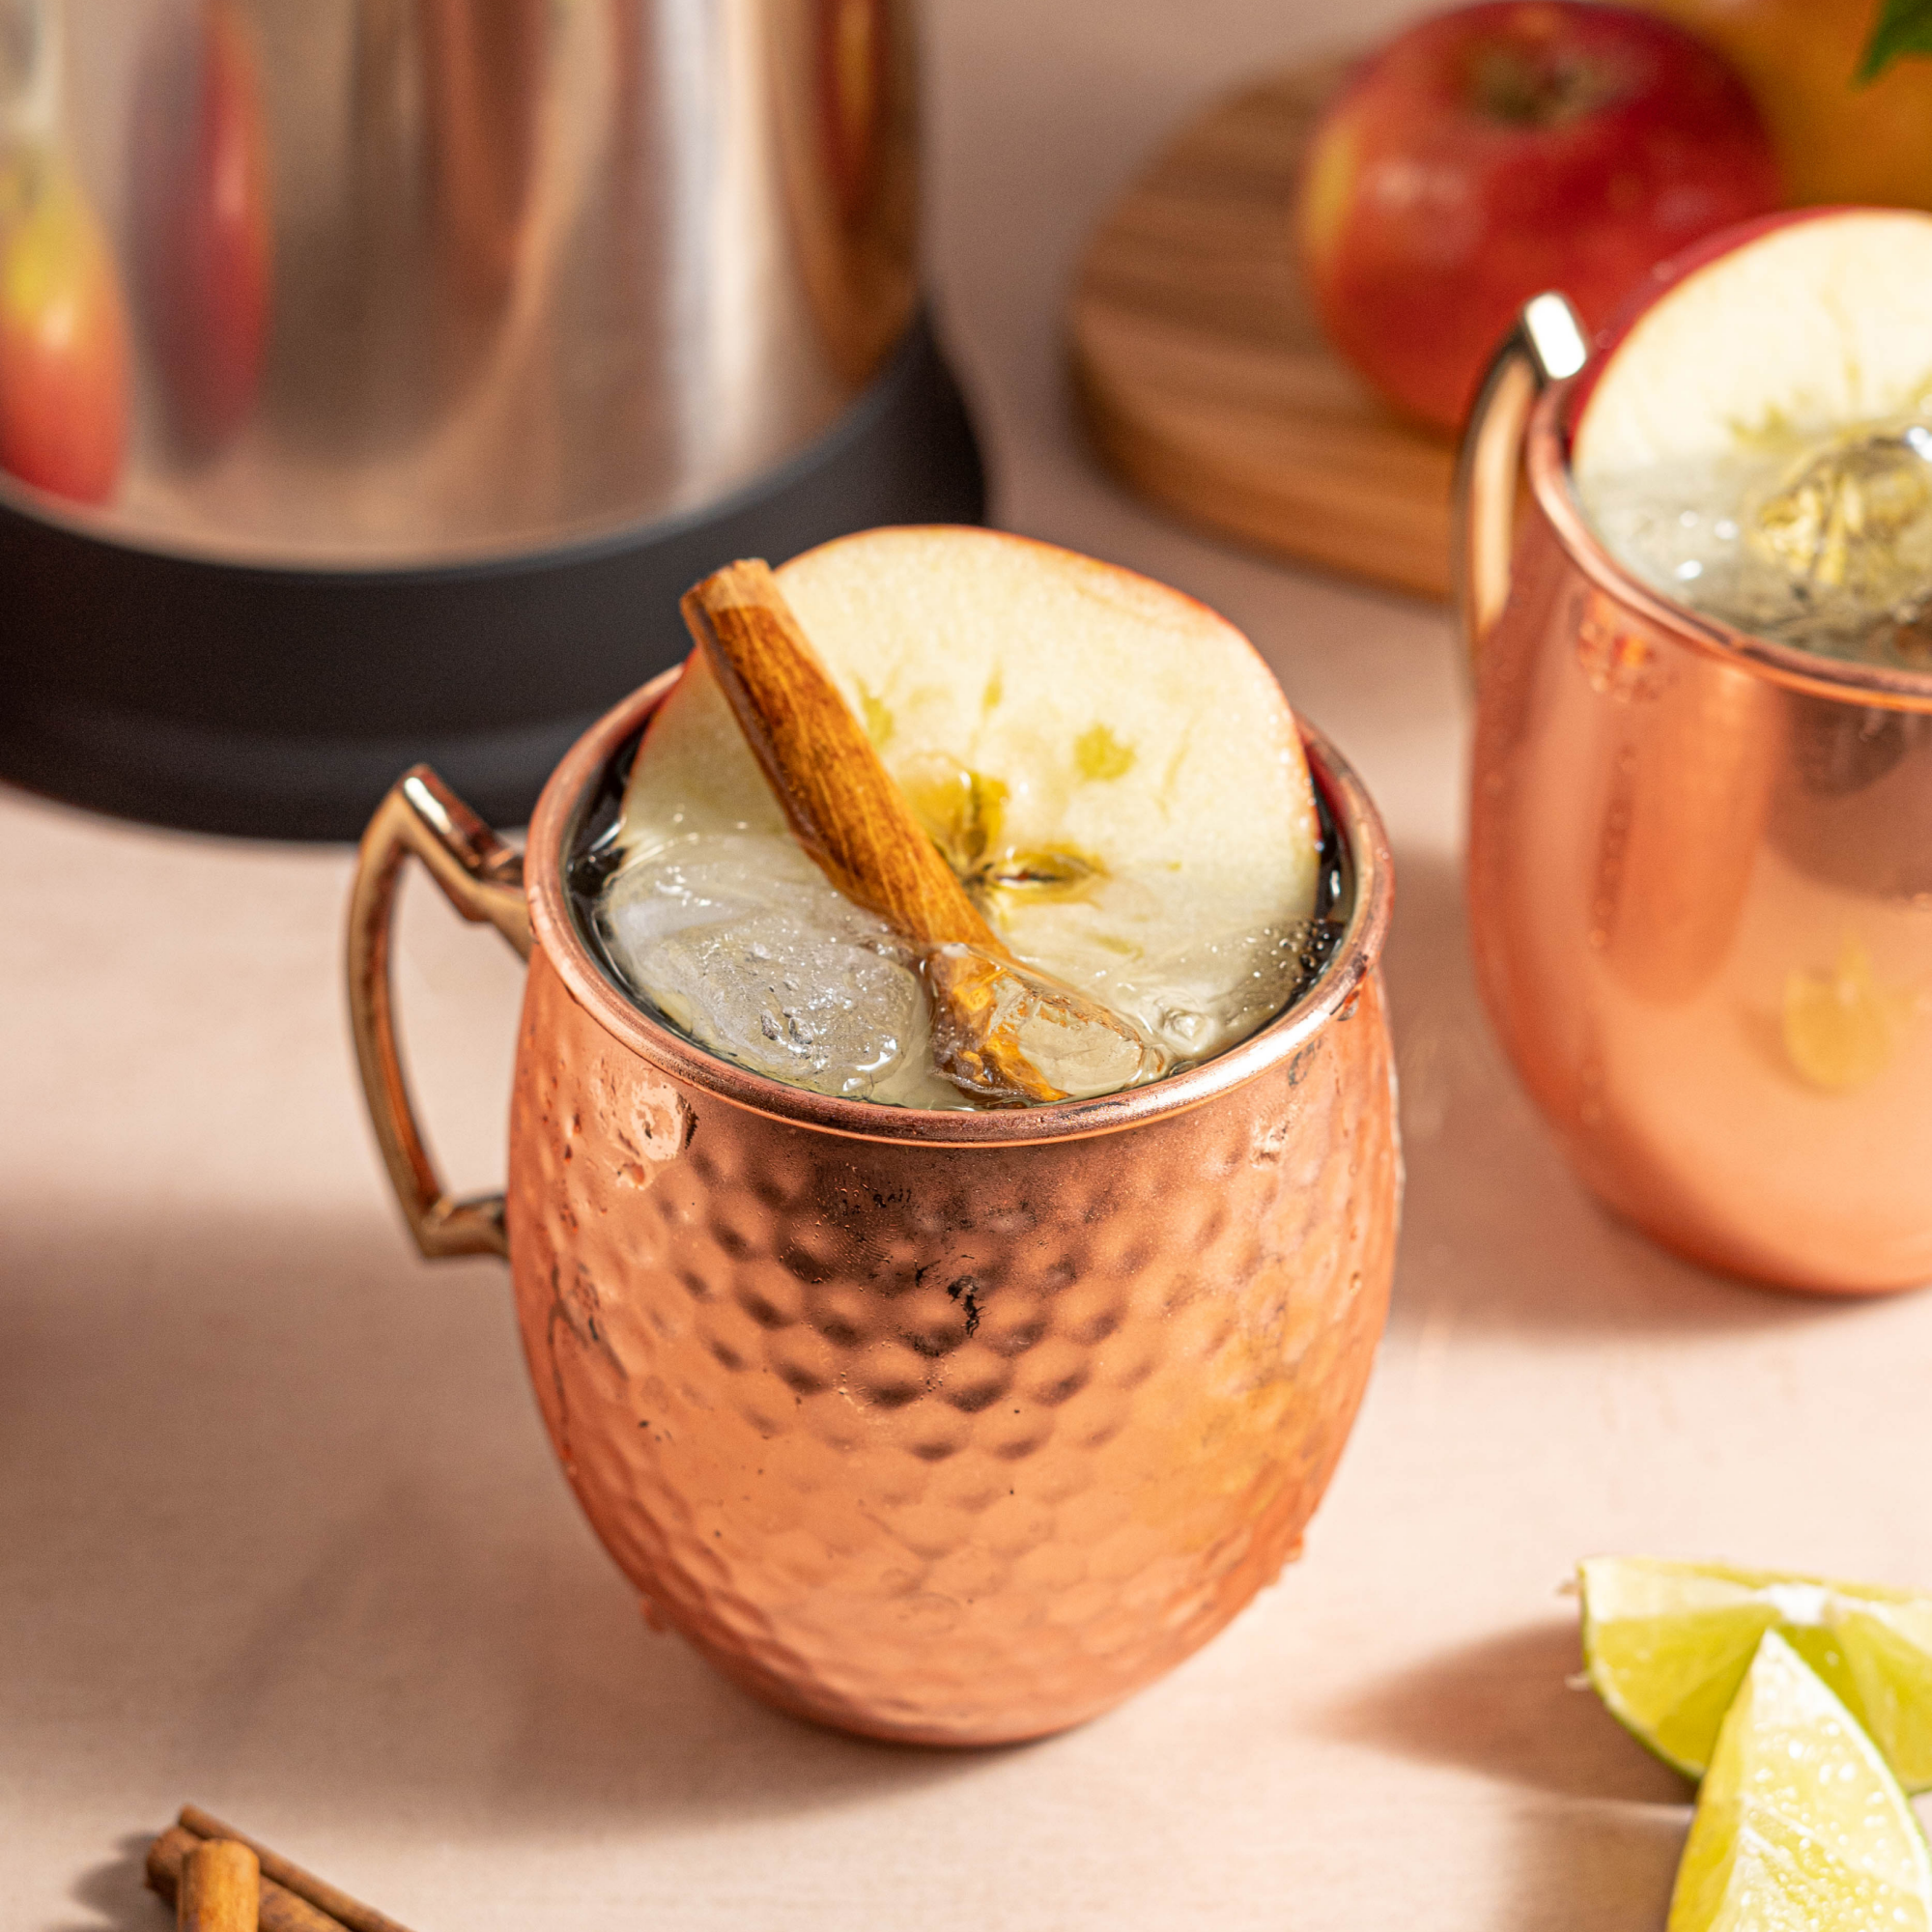 Enjoy a spicy, seasonal Mocktail Mule Full flavor from ginger beer, cinnamon, apples and limes prepared with Almond Cow